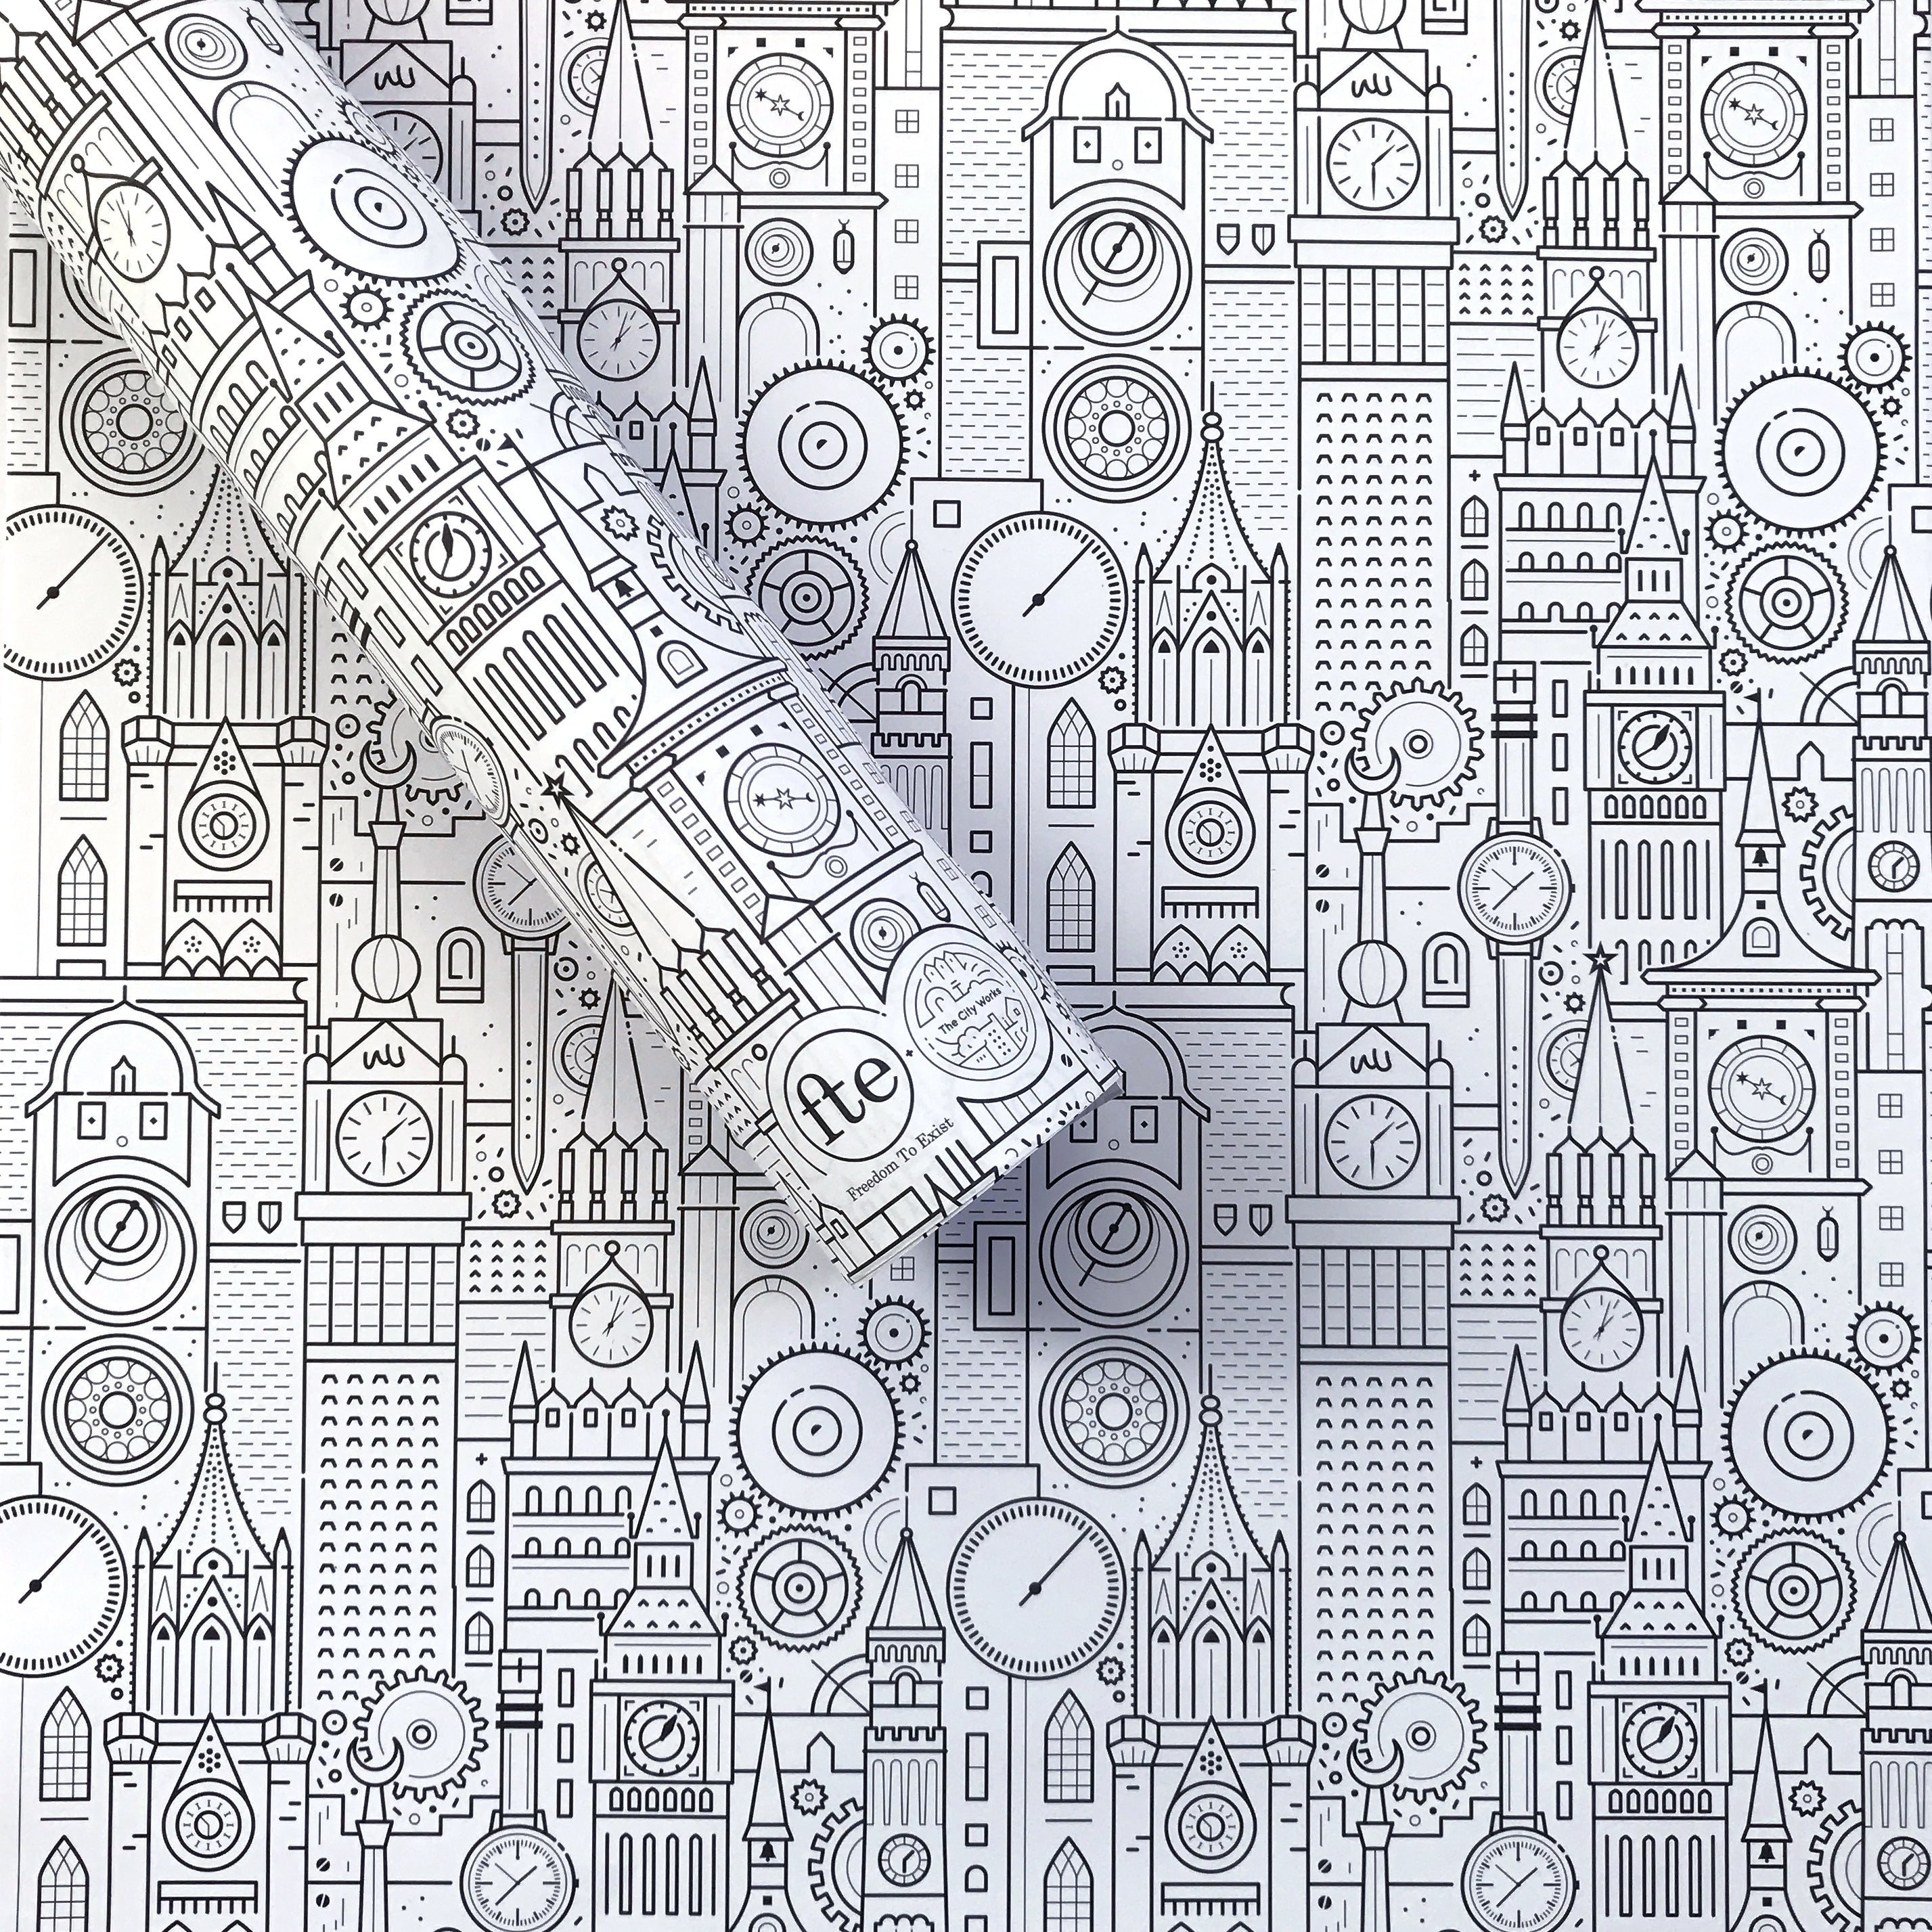 freedom to exist - gift wrap - sunny todd prints - the city works 